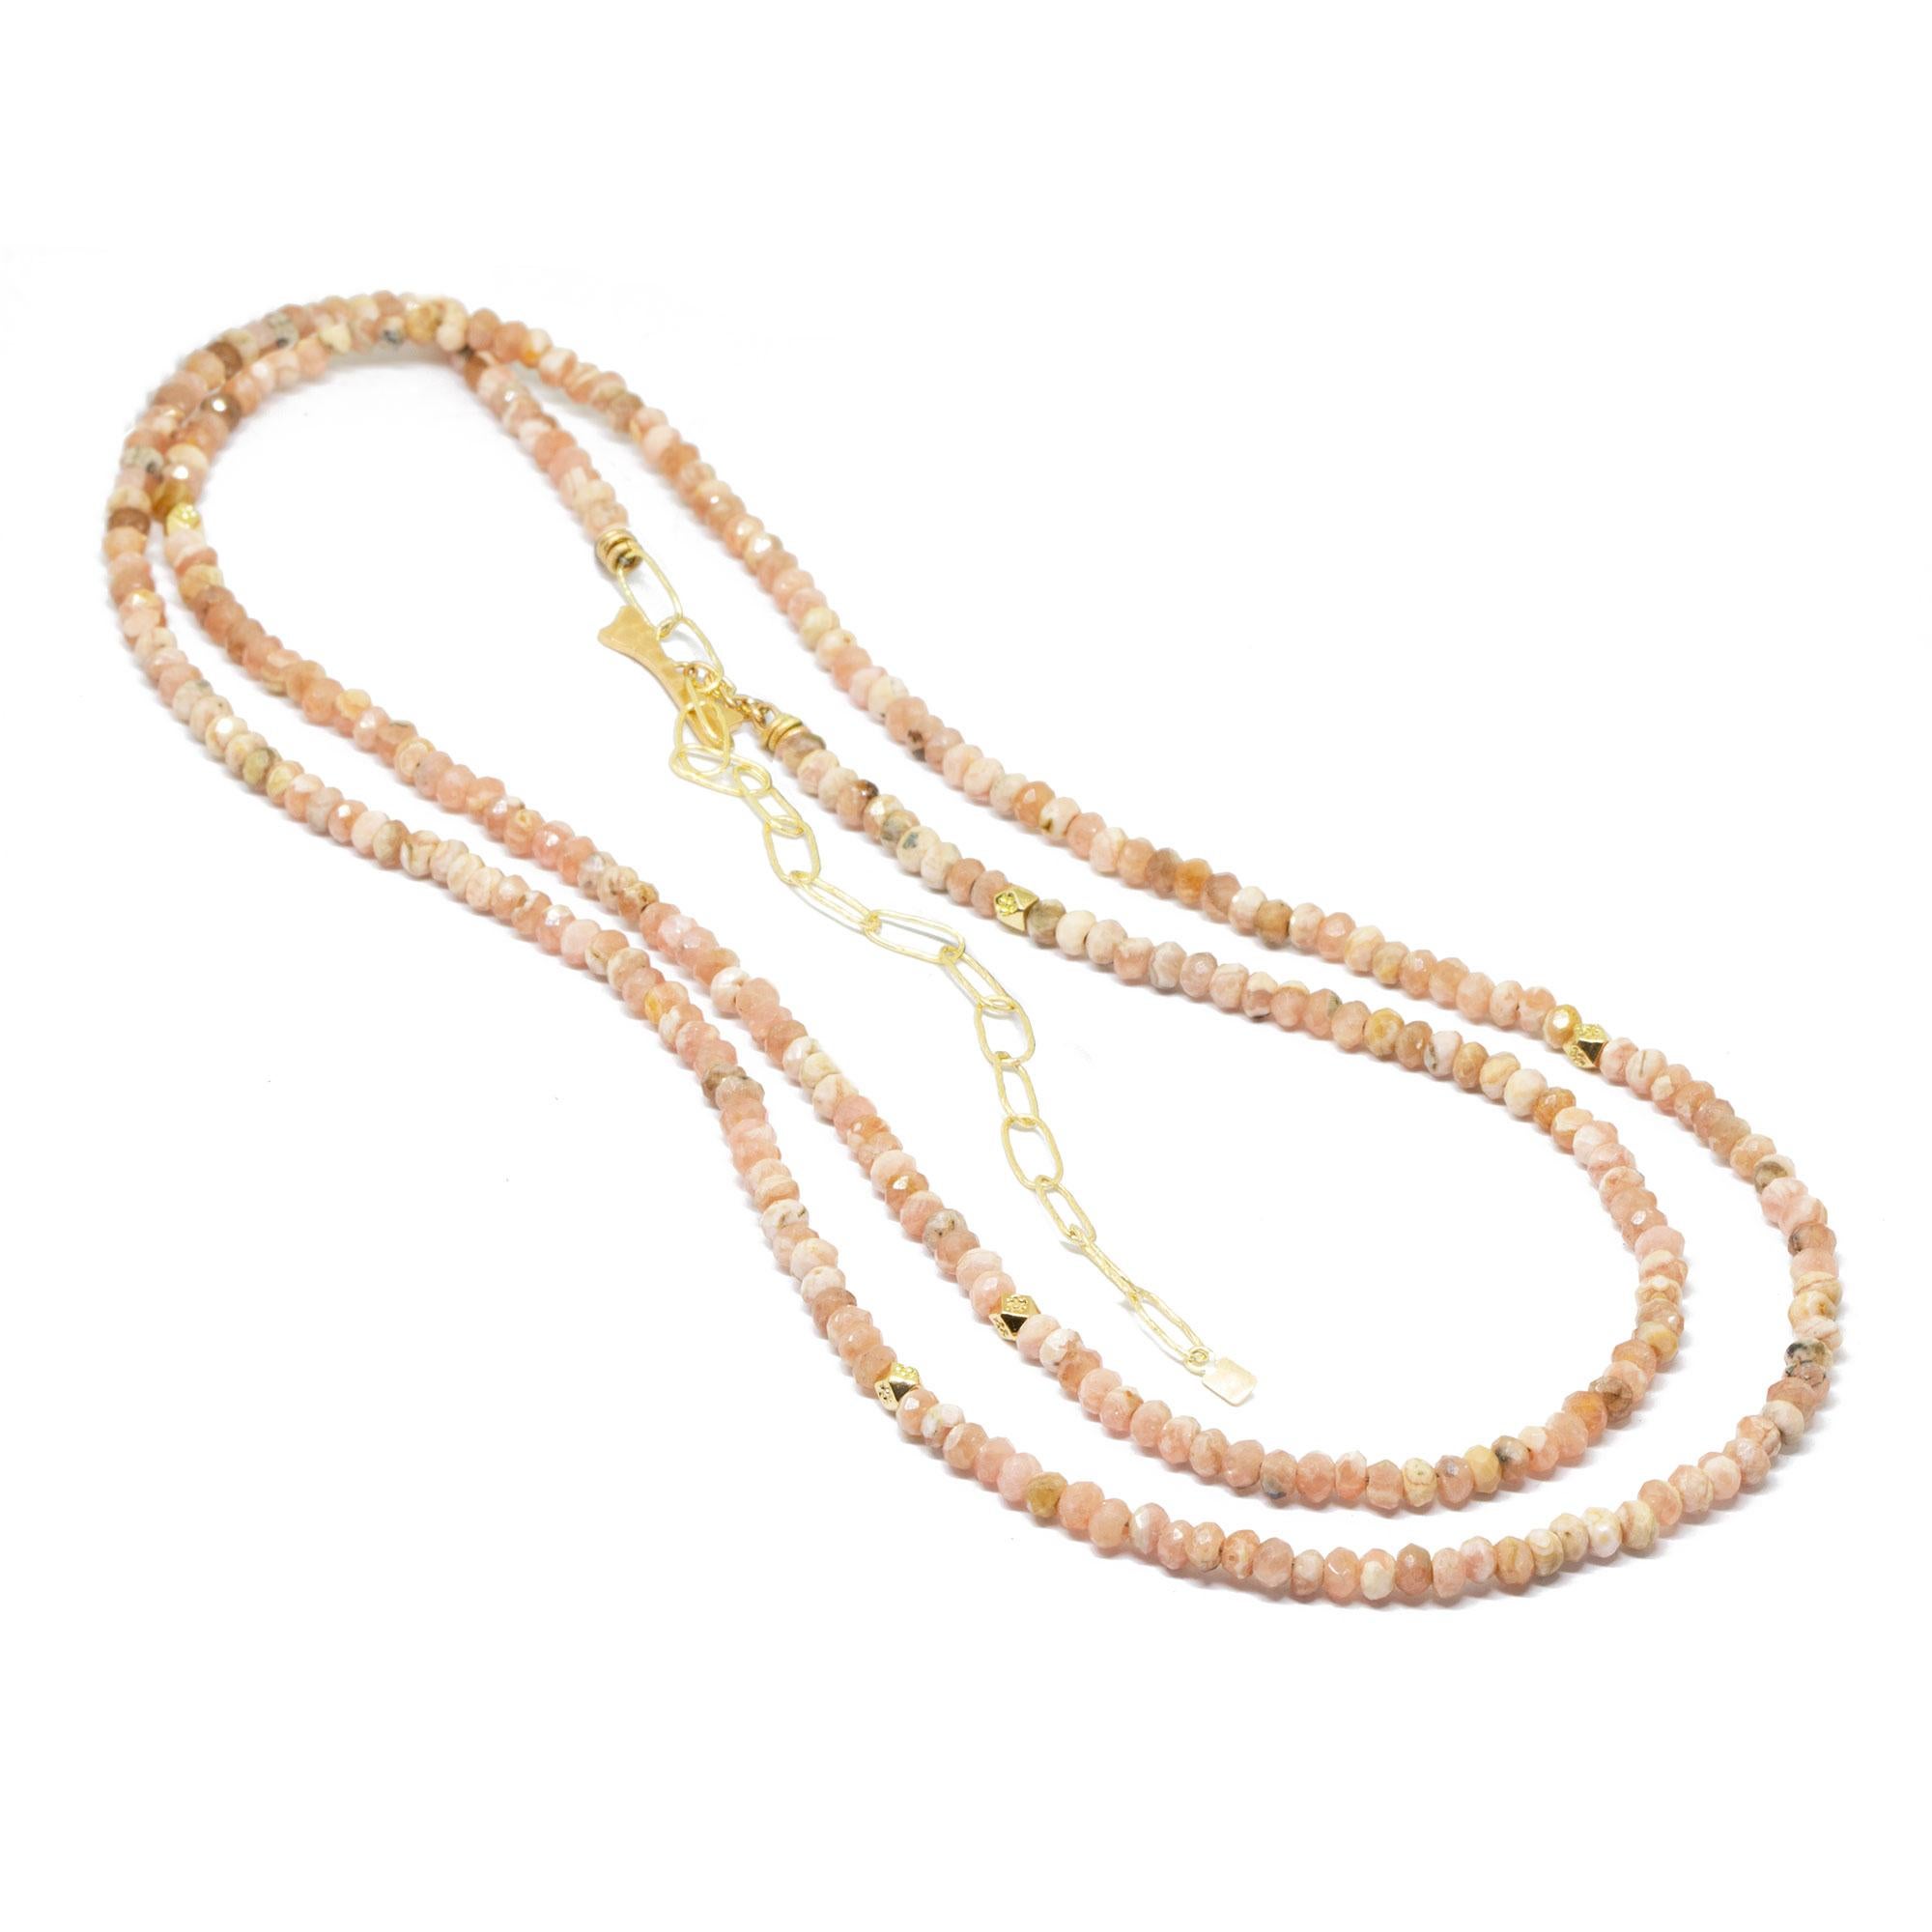 The best part about our Chloe Gold Gemstone Convertable Wrap isn’t just that it can be worn long, doubled-up, or as a wrap bracelet (although that’s pretty cool). It’s that you can thread any of our Charms onto the rhodochrosite beads—have fun